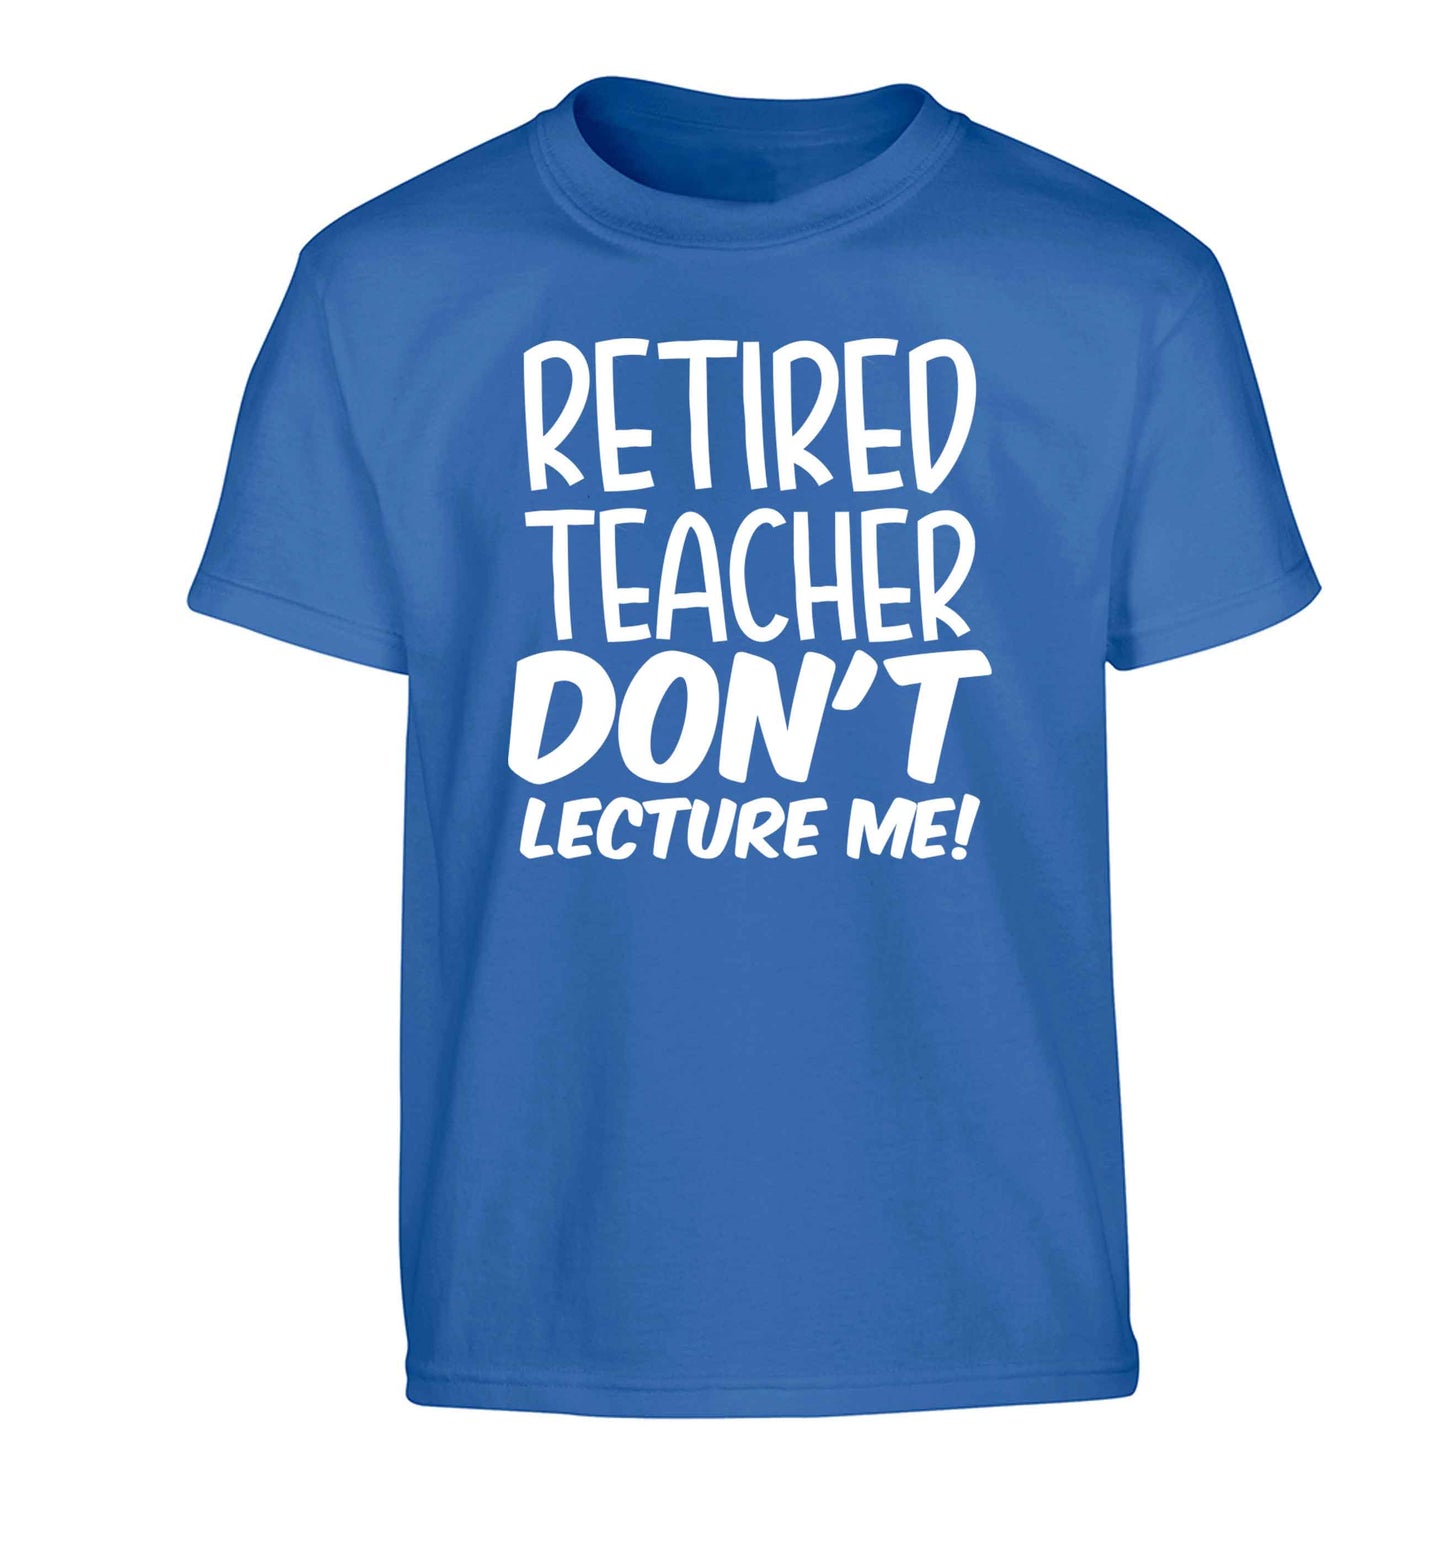 Retired teacher don't lecture me! Children's blue Tshirt 12-13 Years